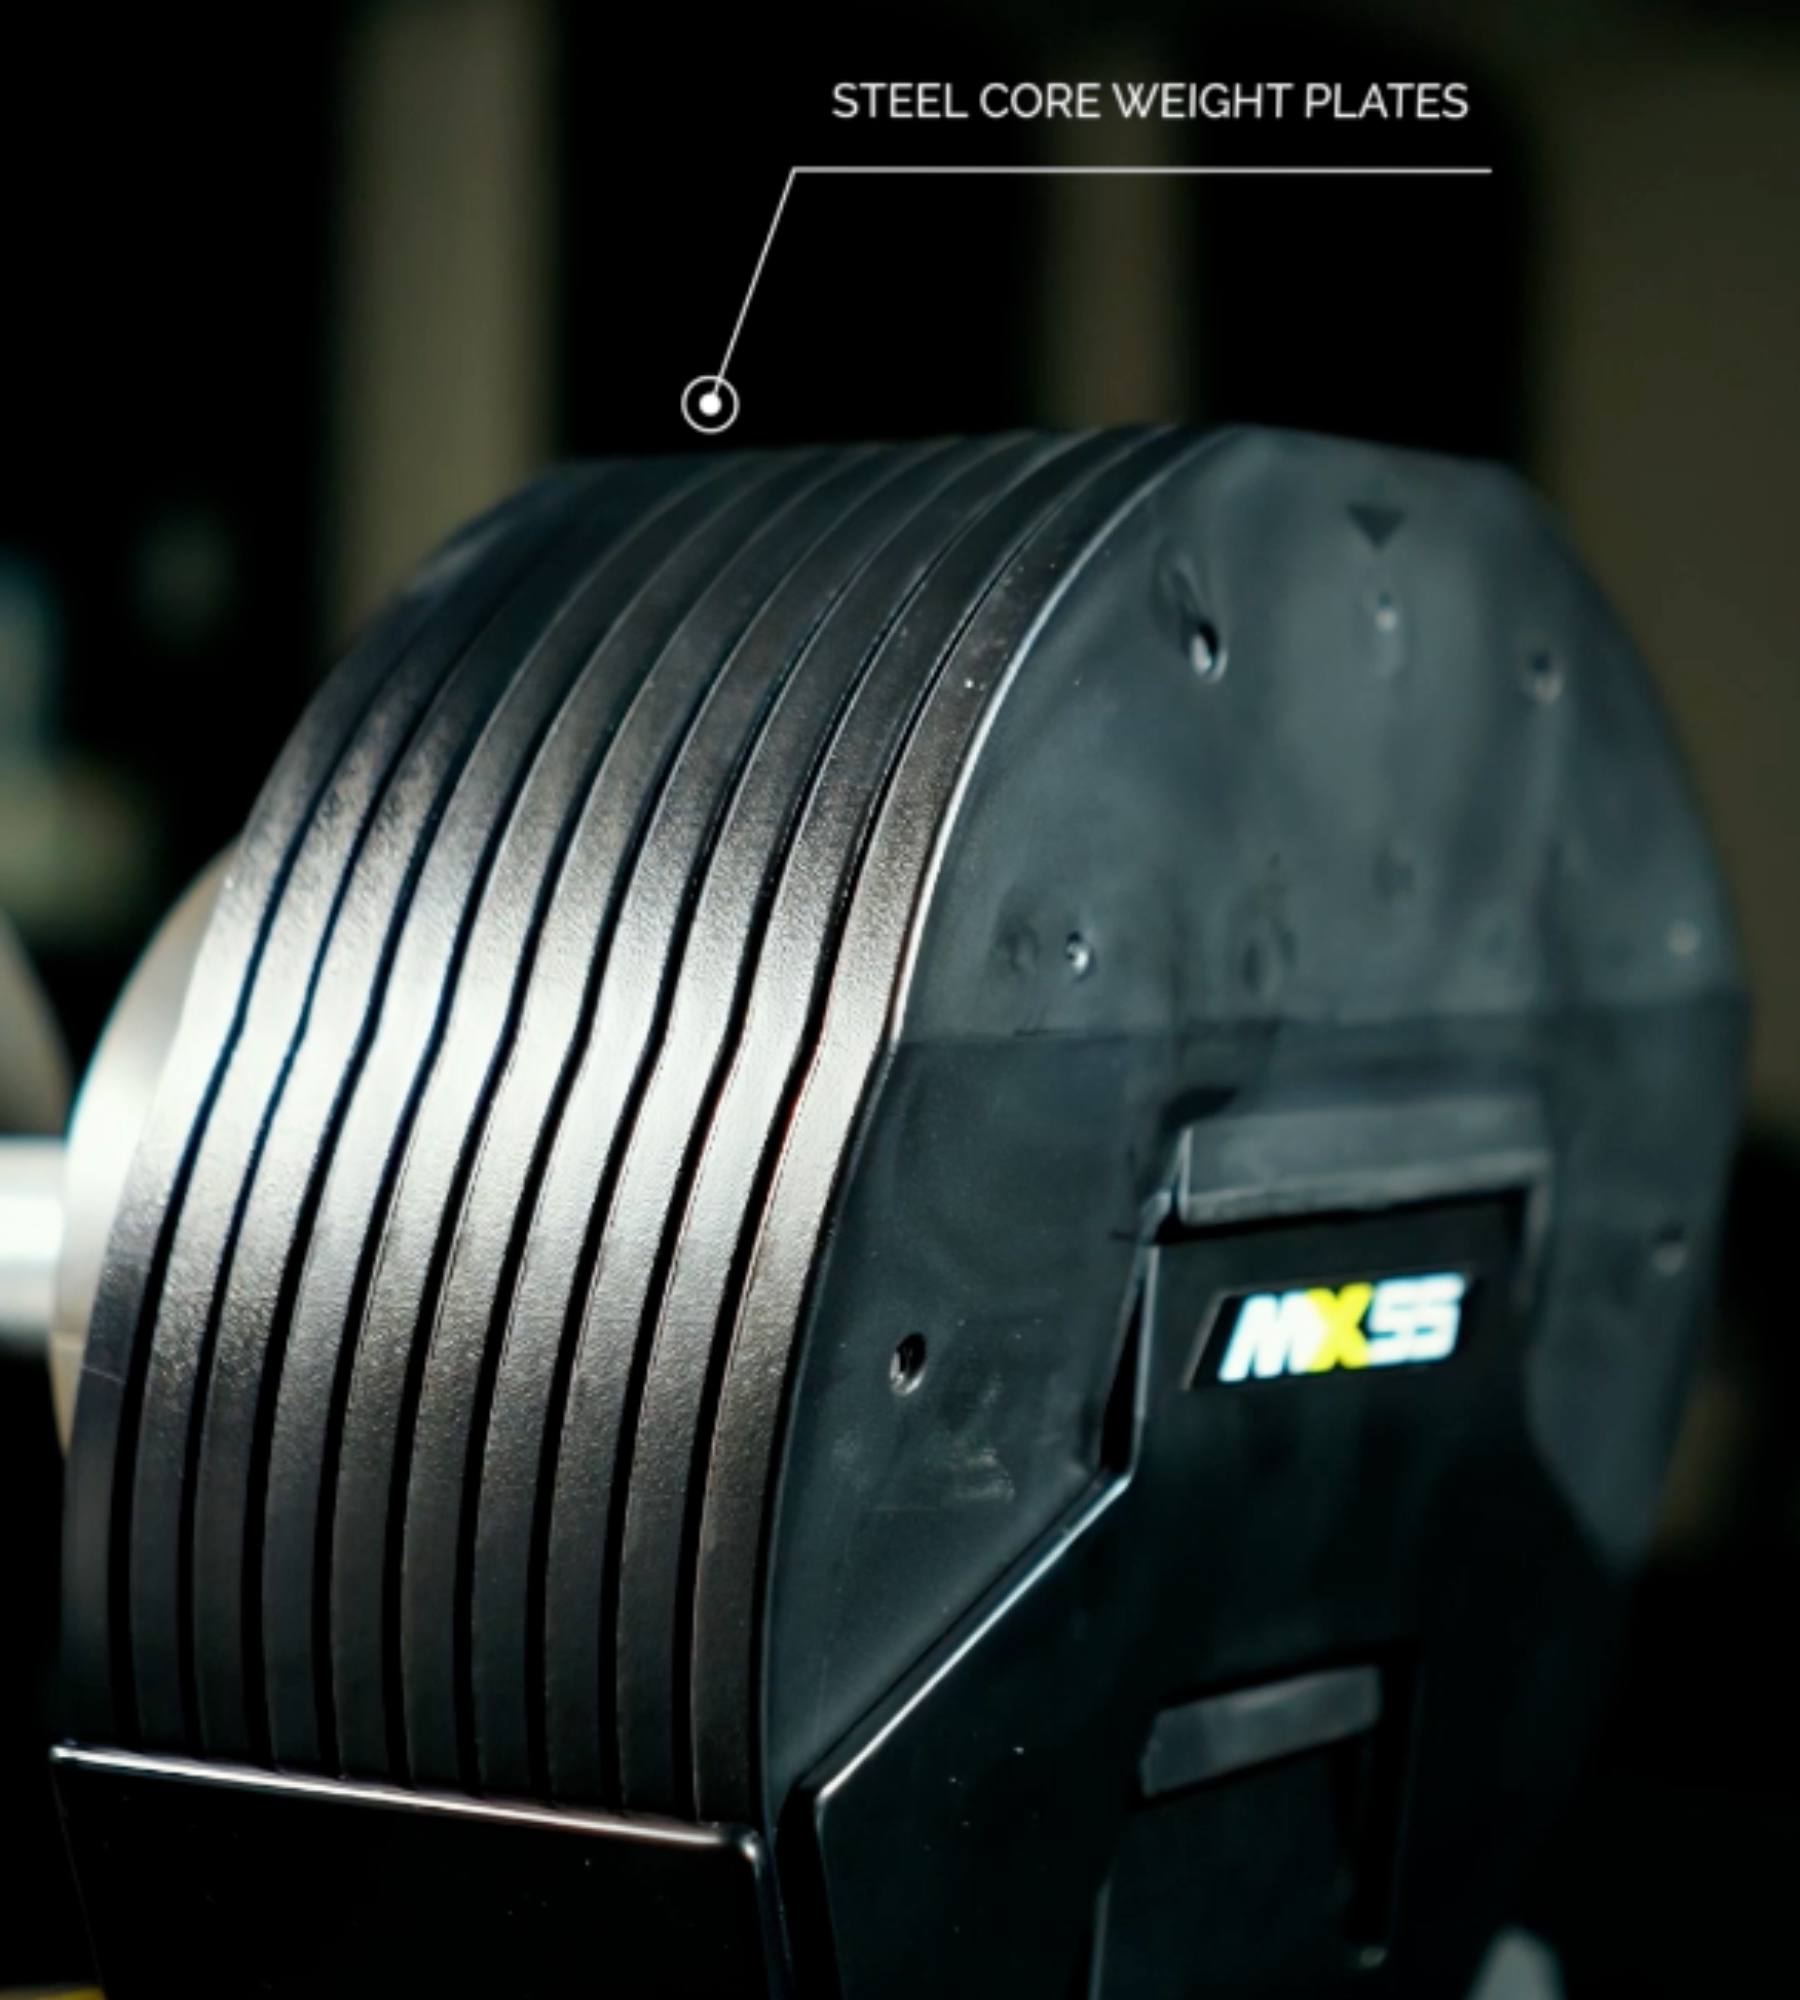 steel core weight plates on mx select barbell system